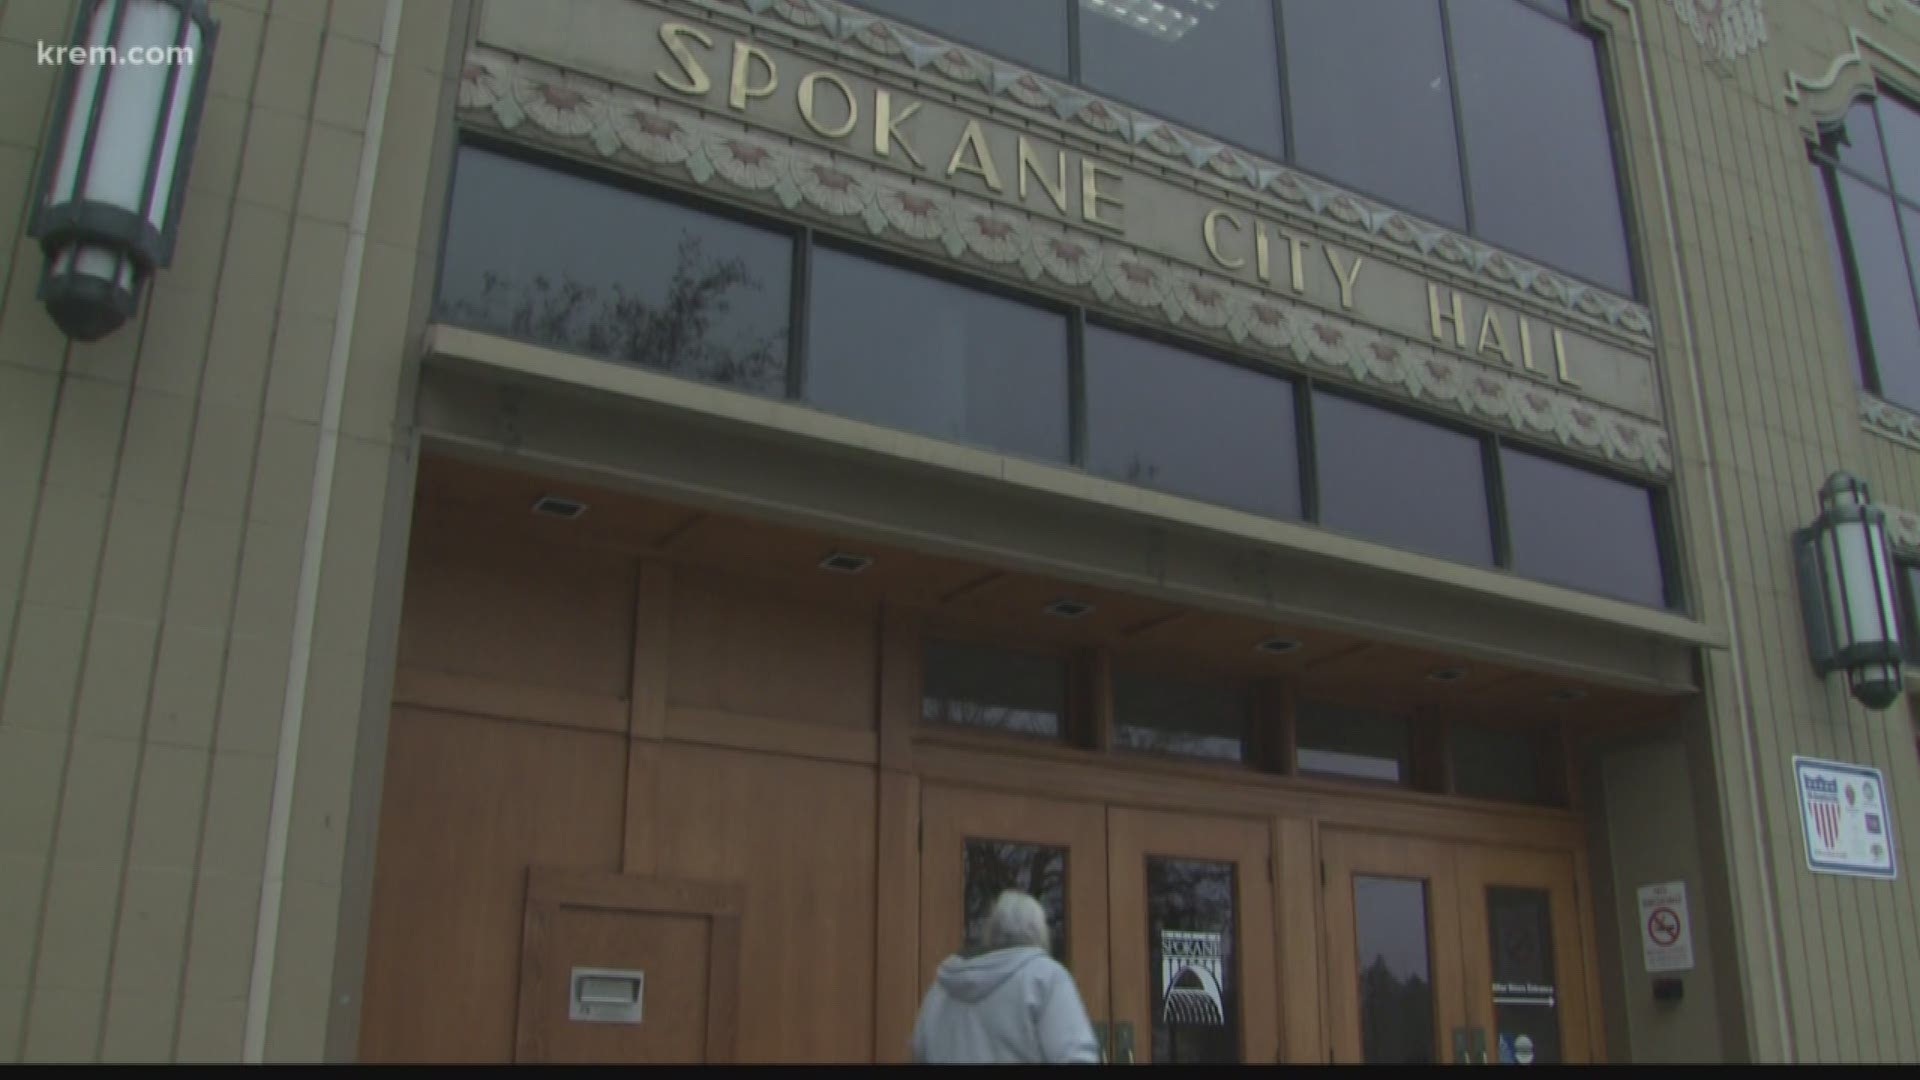 Spokane's City Council decided not to vote on an ordinance on Monday night reaffirming that city hall's first floor lobby is open to all members of the public during business hours, including homeless residents.